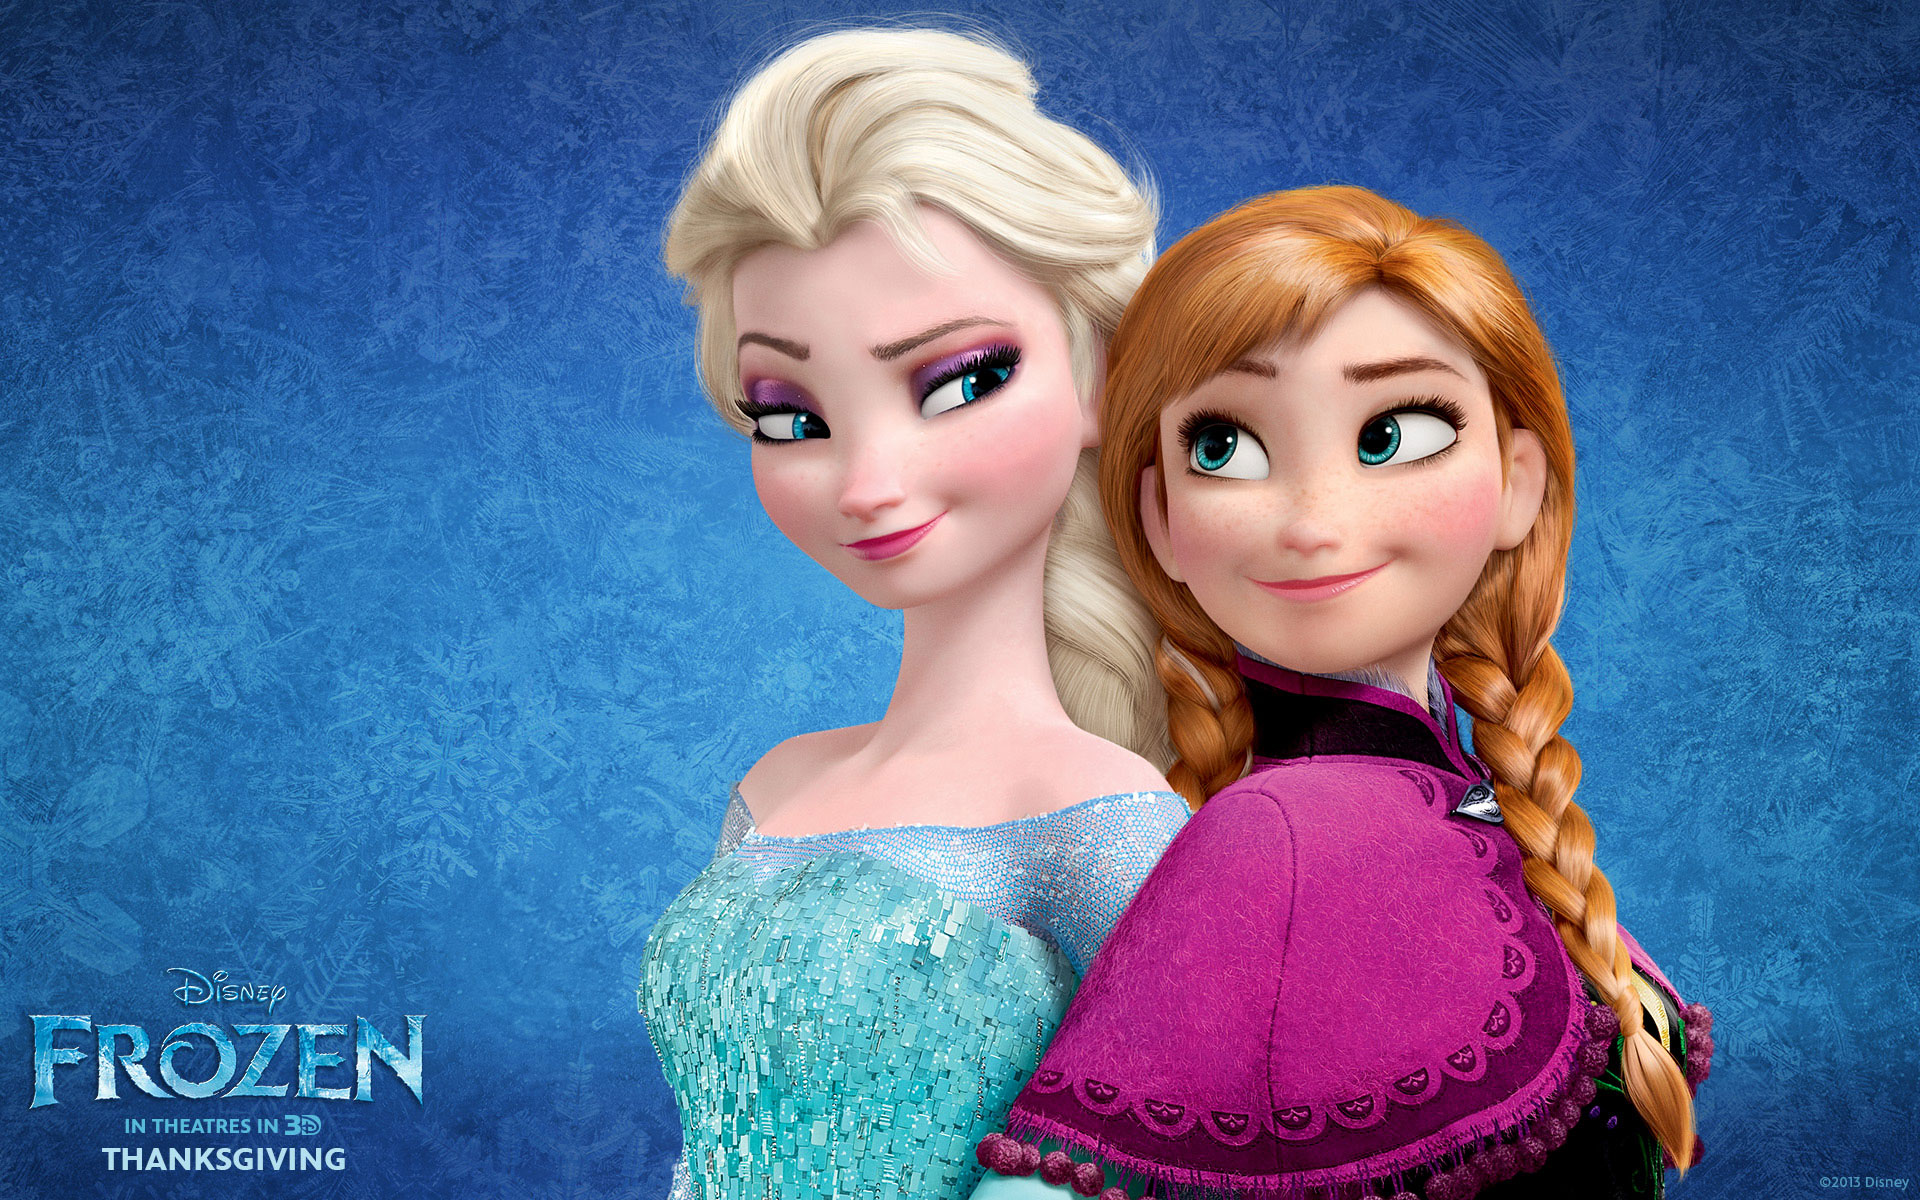  20131112frozen movie wallpapers hd facebook timeline covers